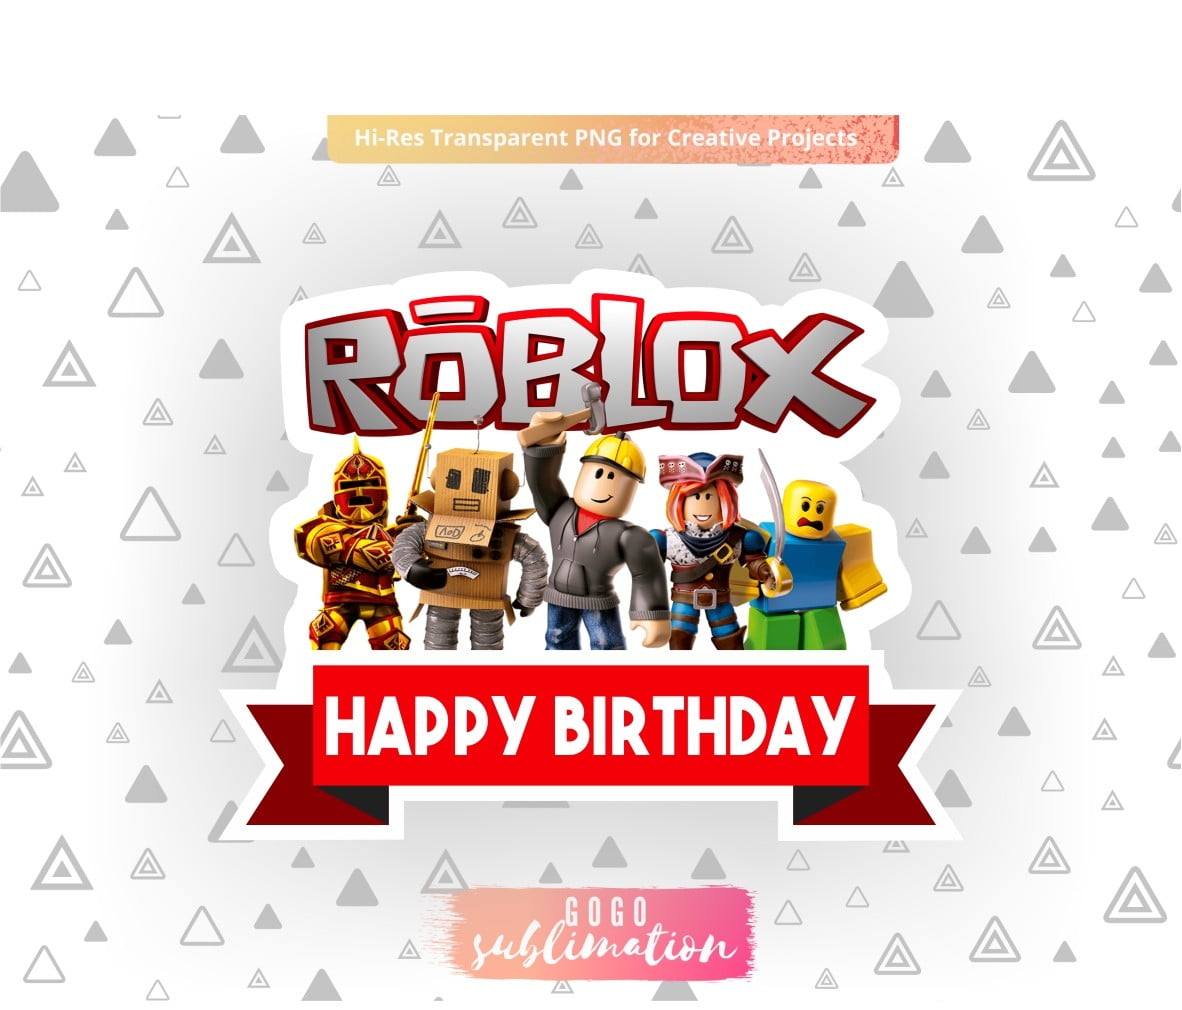 Roblox | Sweet Tops - Personalised, Edible Cake Toppers and Gifts